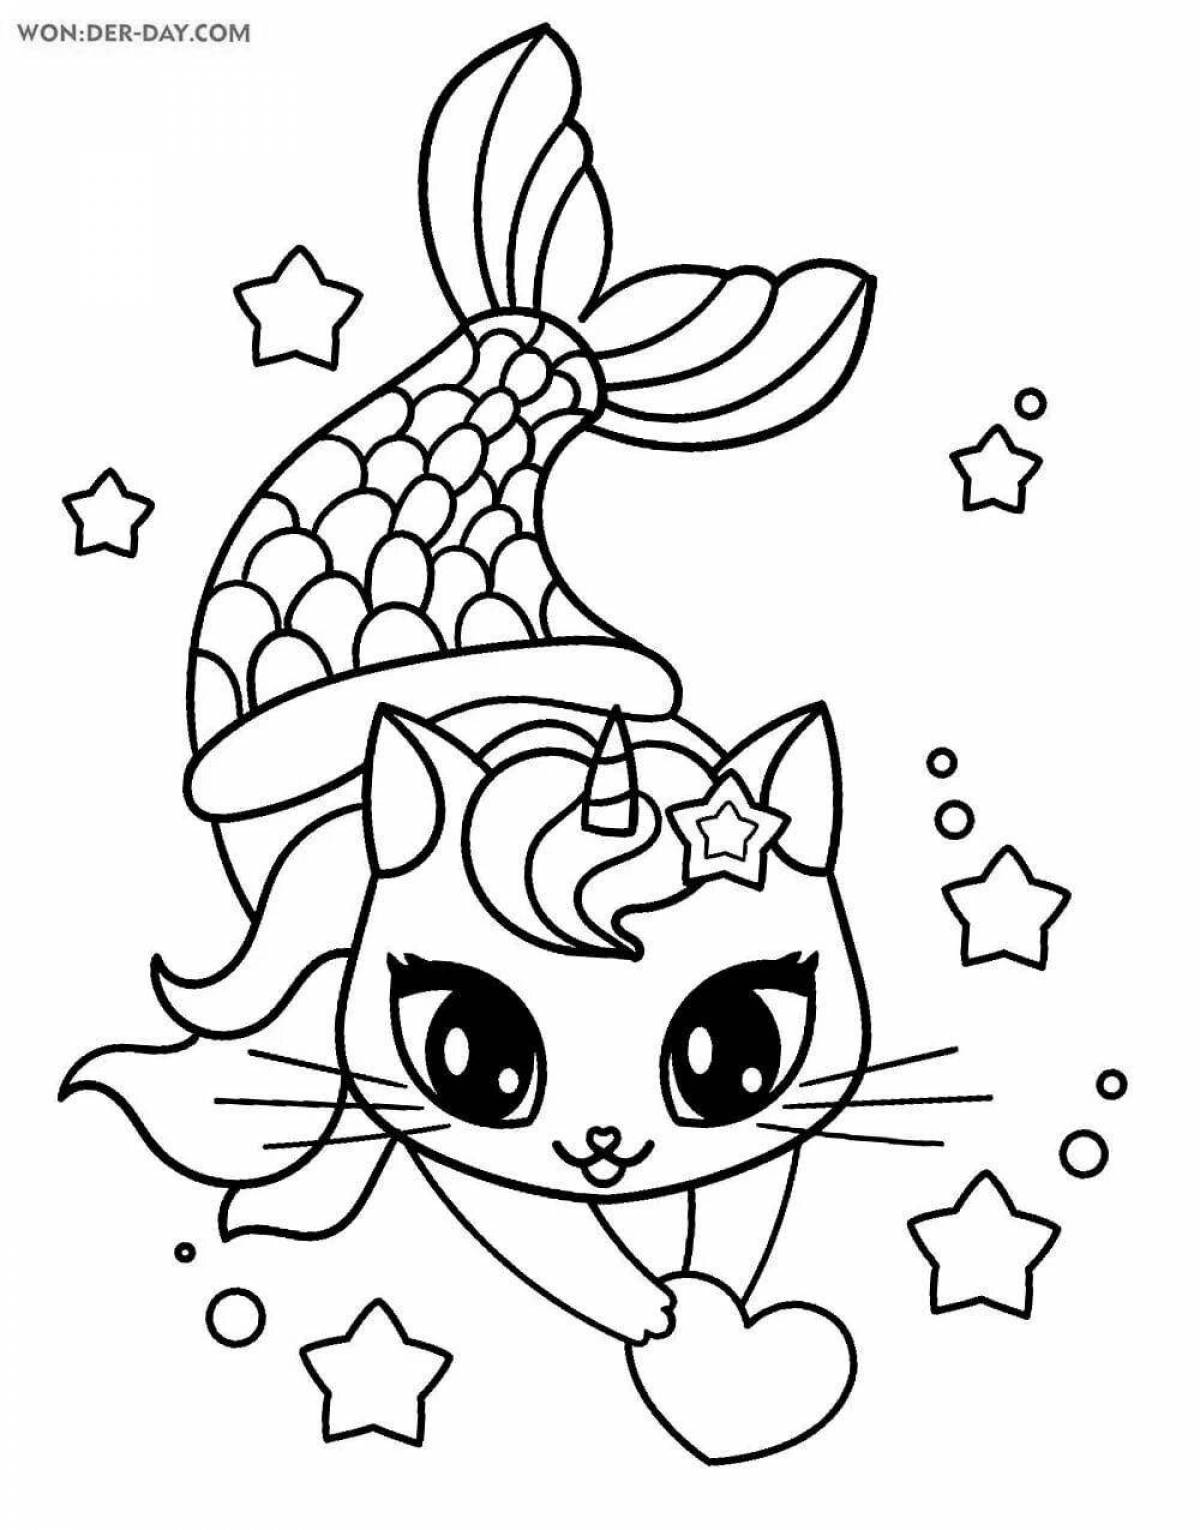 Playful hello kitty mermaid coloring page